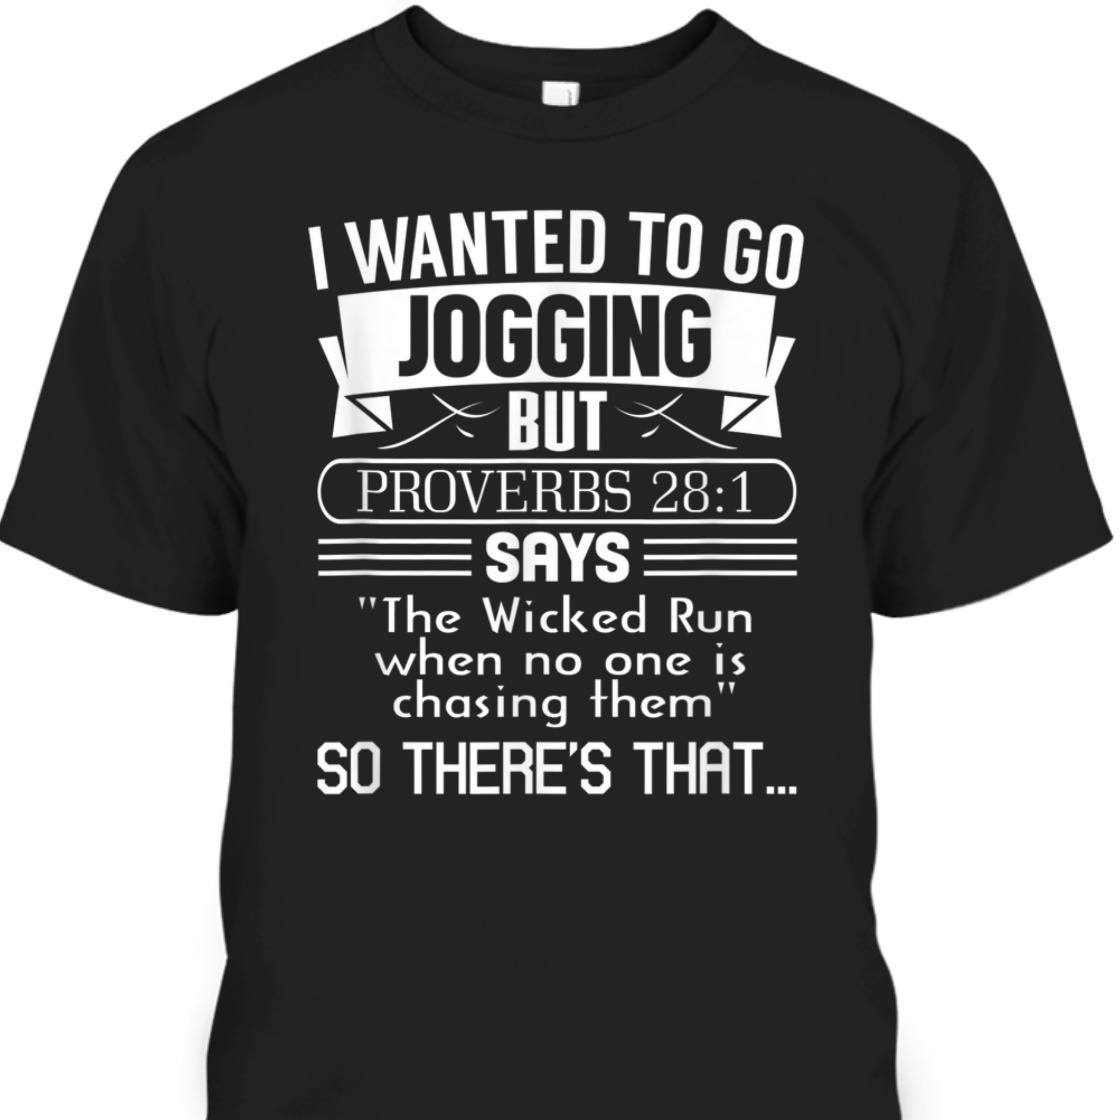 I Wanted To Go Jogging But Proverbs 28:1 Funny Christian T-Shirt